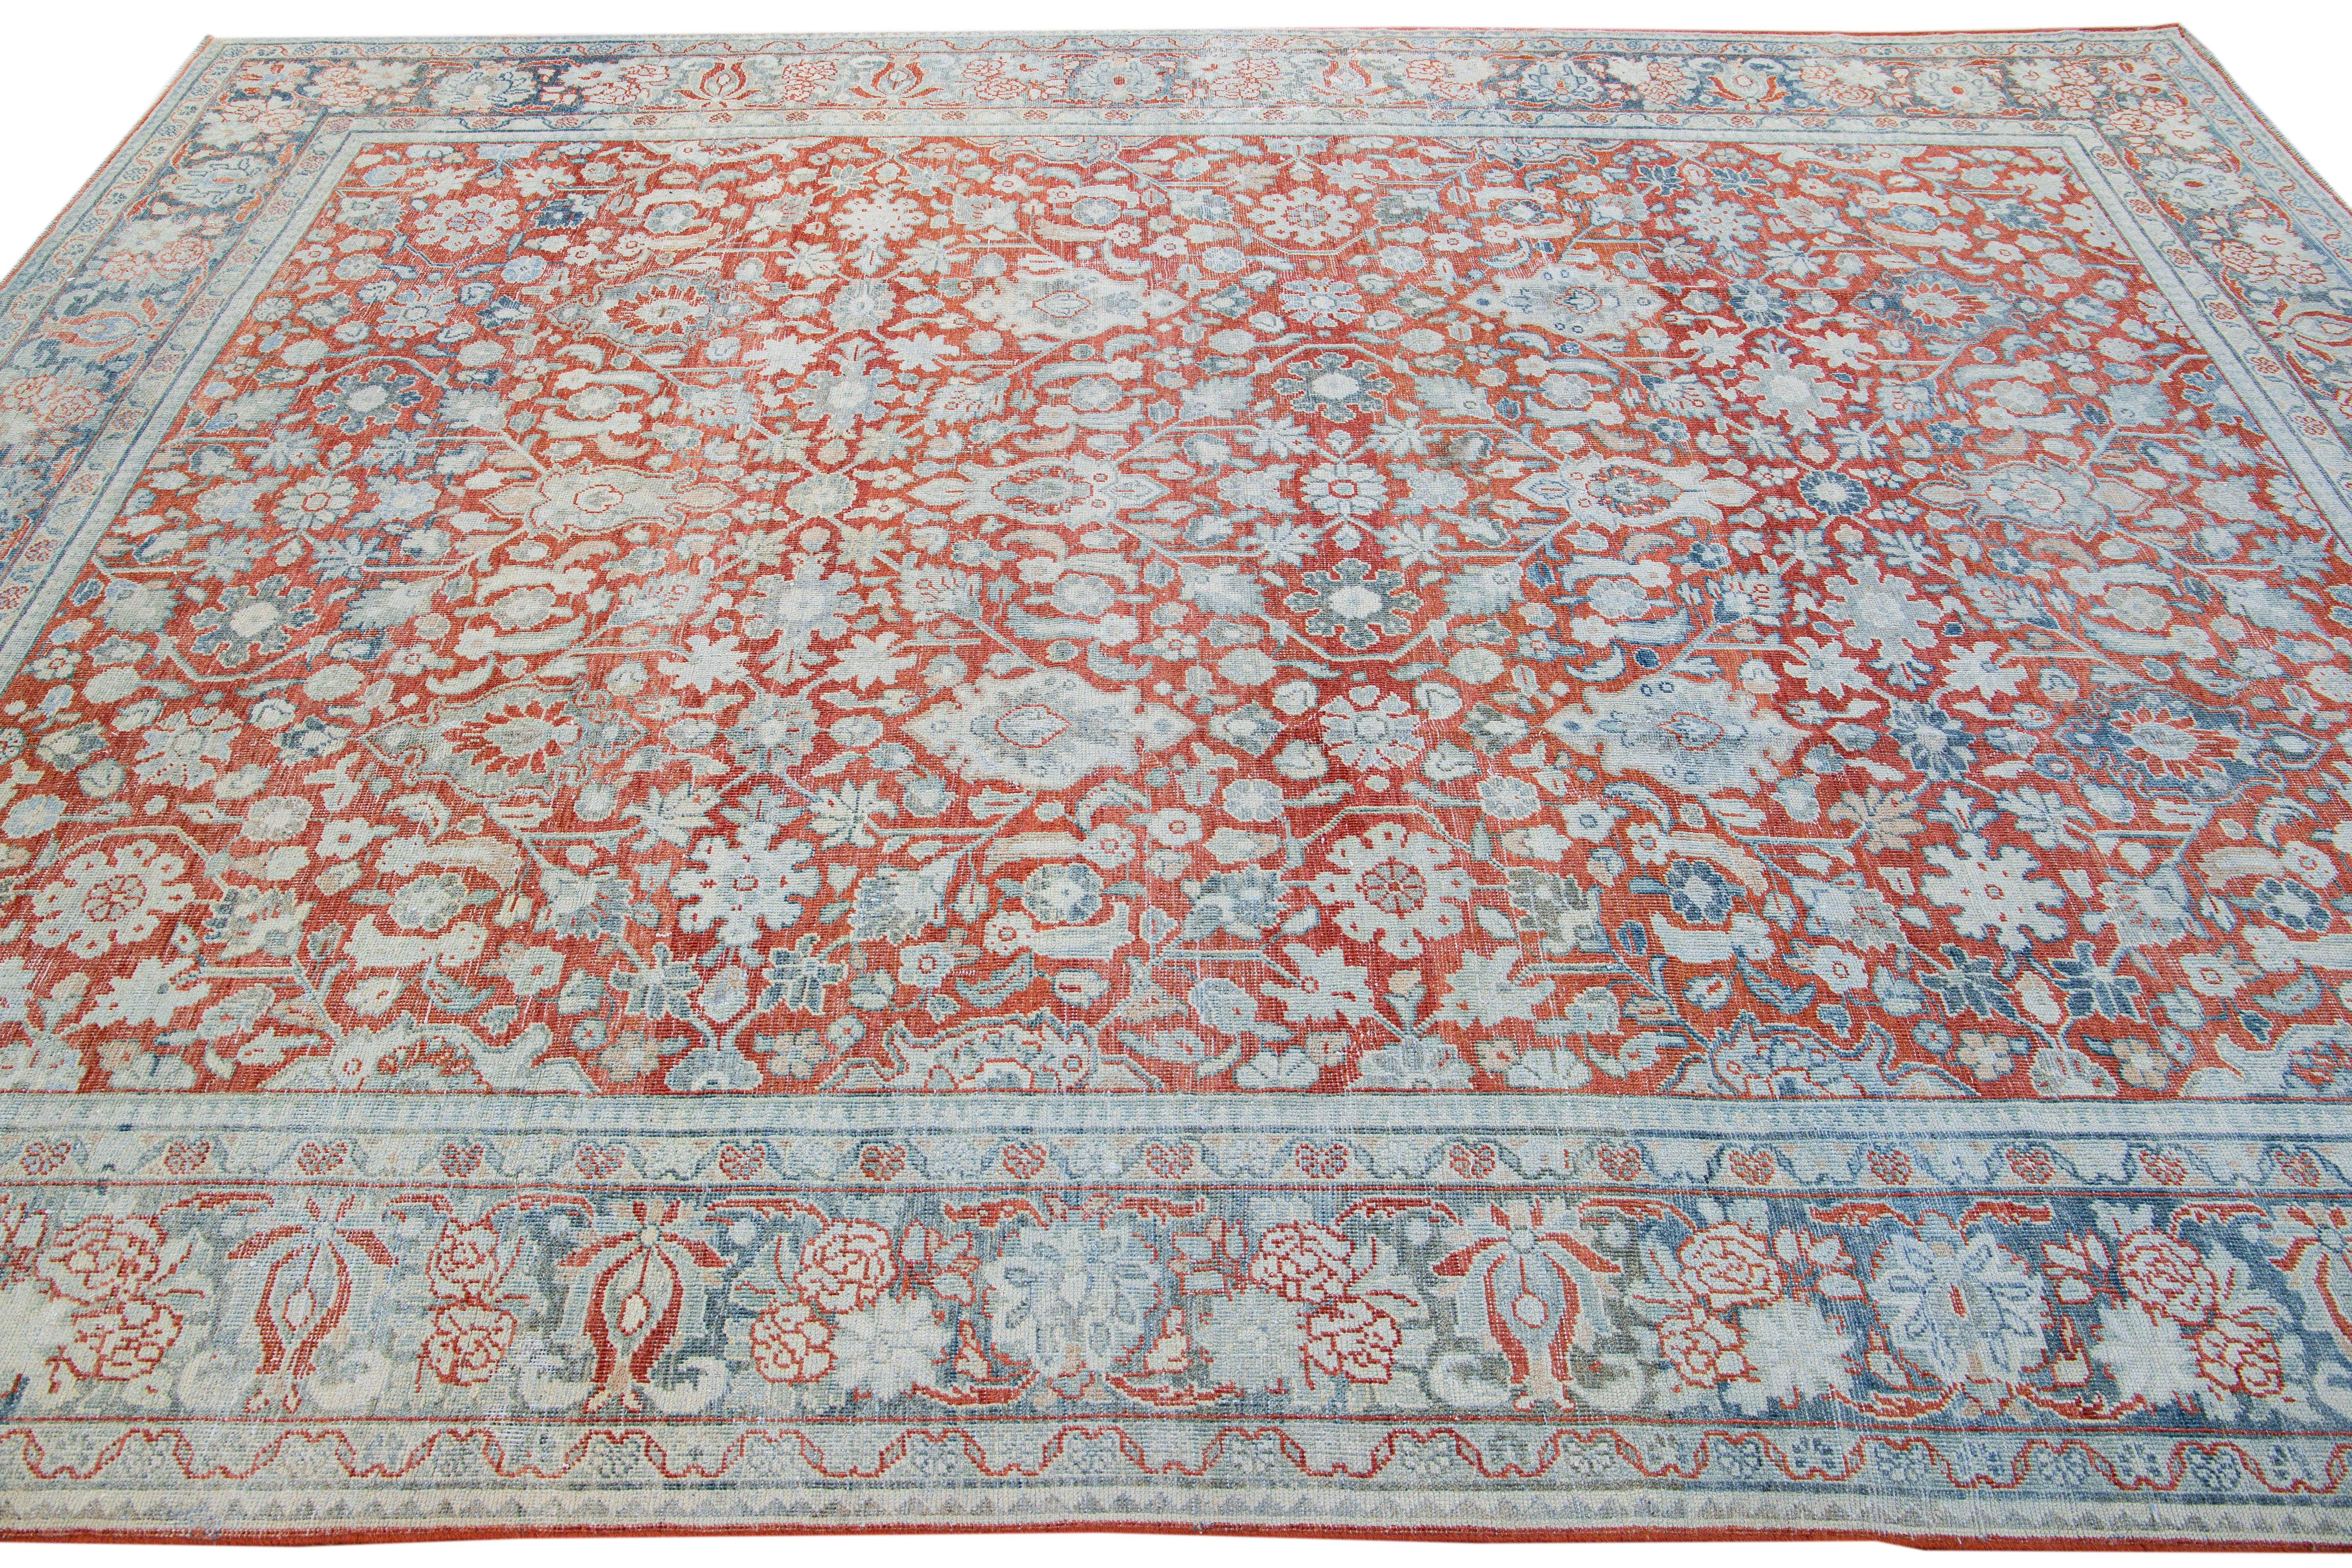 Antique Mahal Handmade Floral Motif Red Wool Rug In Good Condition For Sale In Norwalk, CT